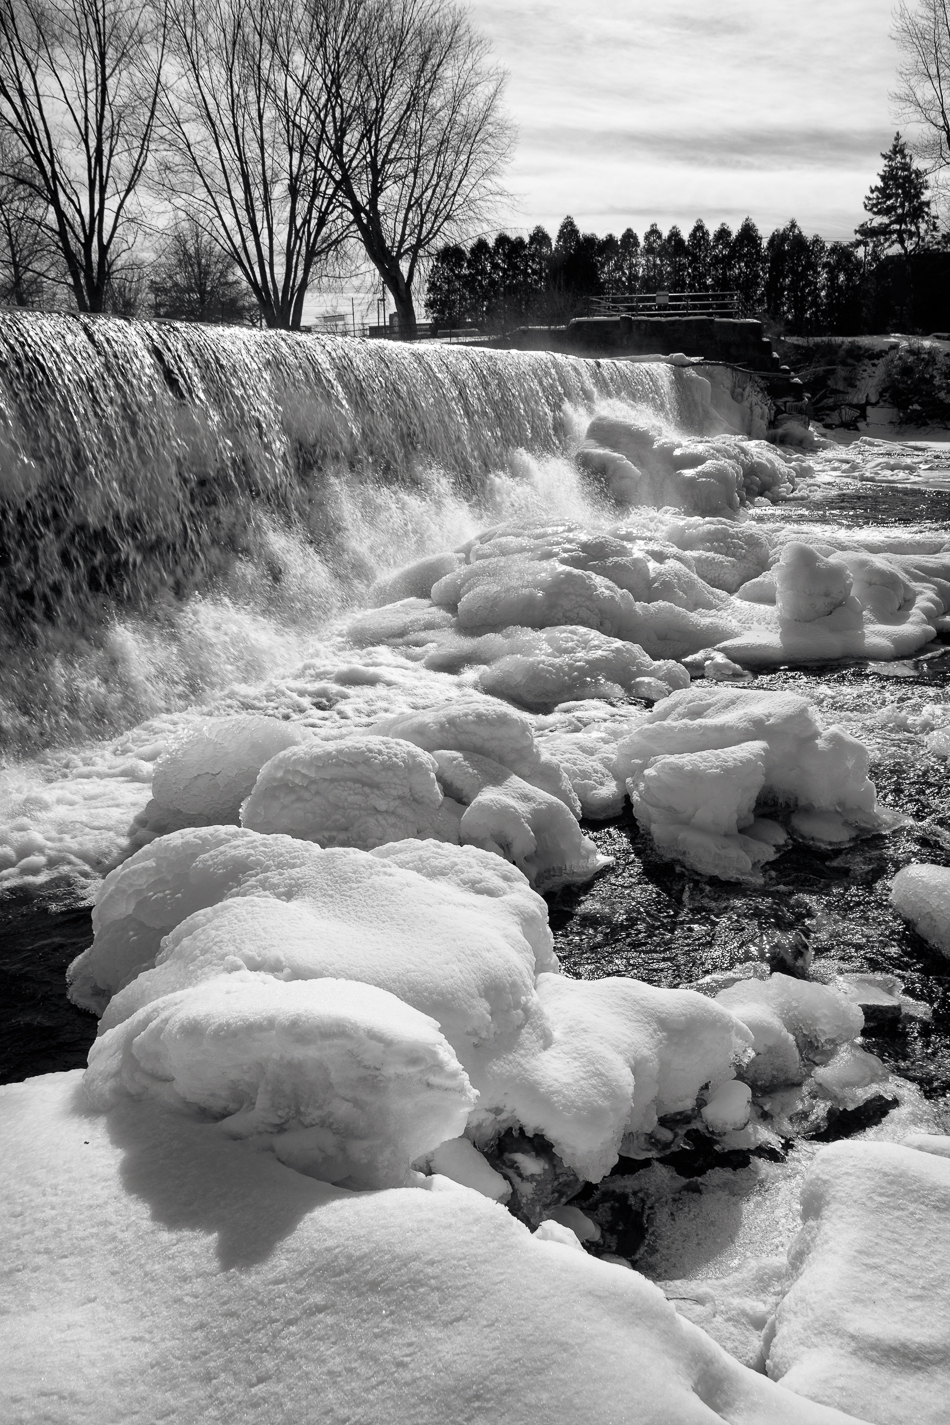 Photo of ice formations at the base of the Ashuelot River Dam in Keene, NH